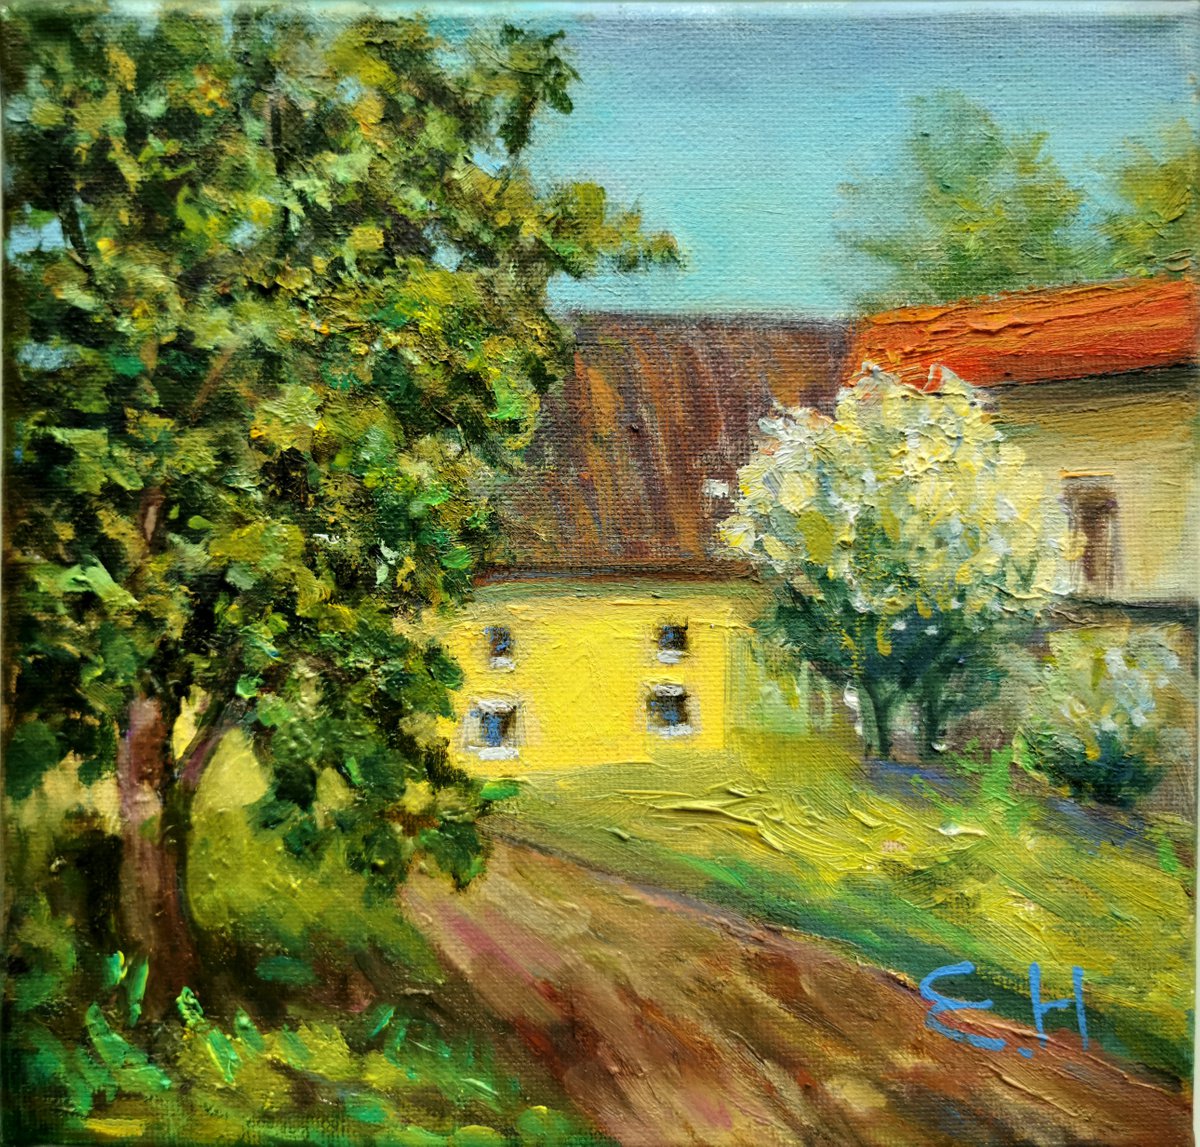 The Backyard painting, original oil painting by Elvira Hilkevich